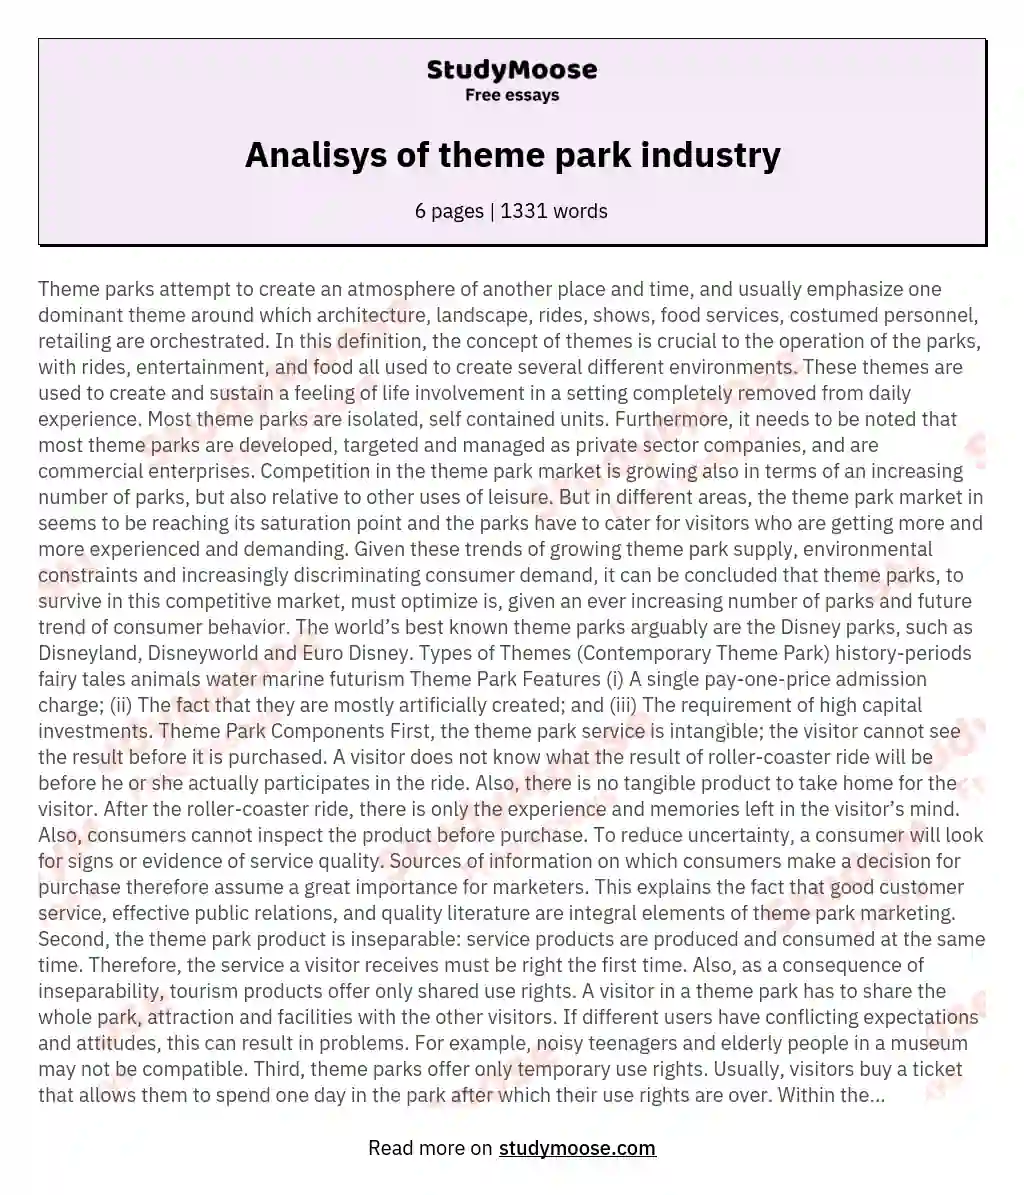 Analisys of theme park industry